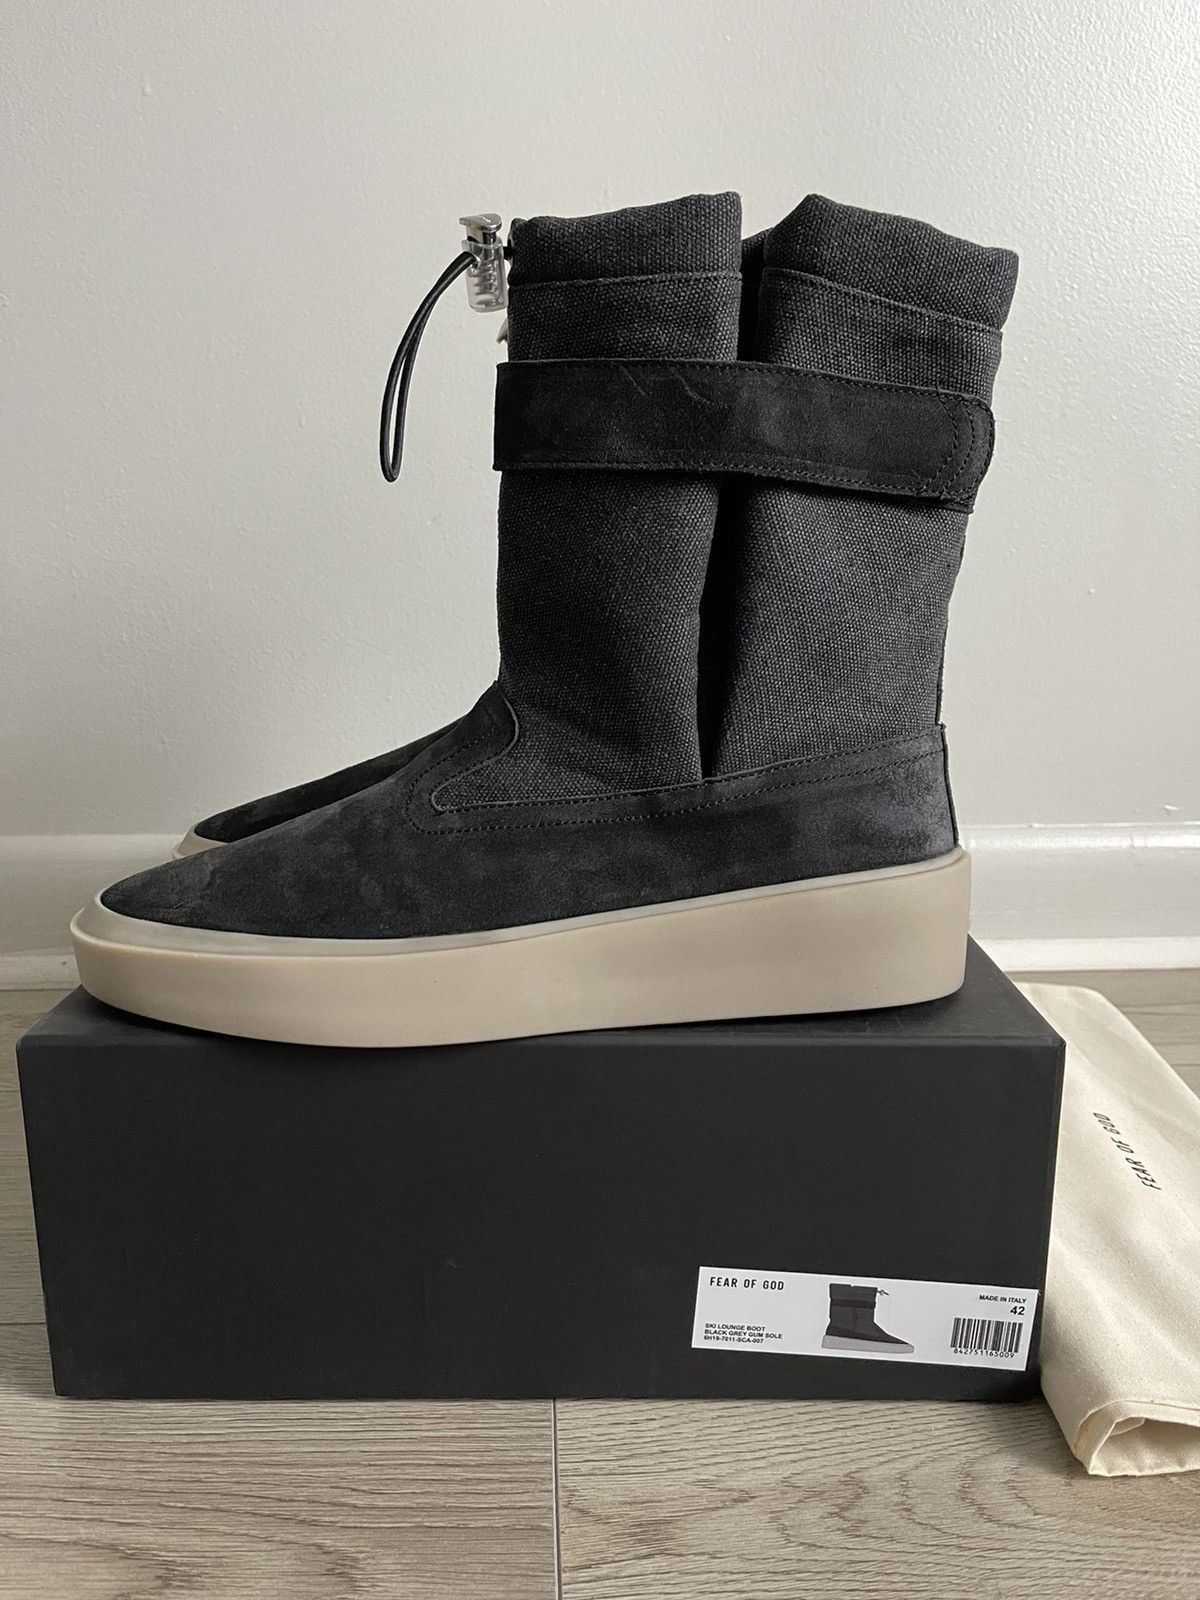 FEAR OF GOD SKI LOUNGE BOOT / BLK GRY 42 - ブーツ